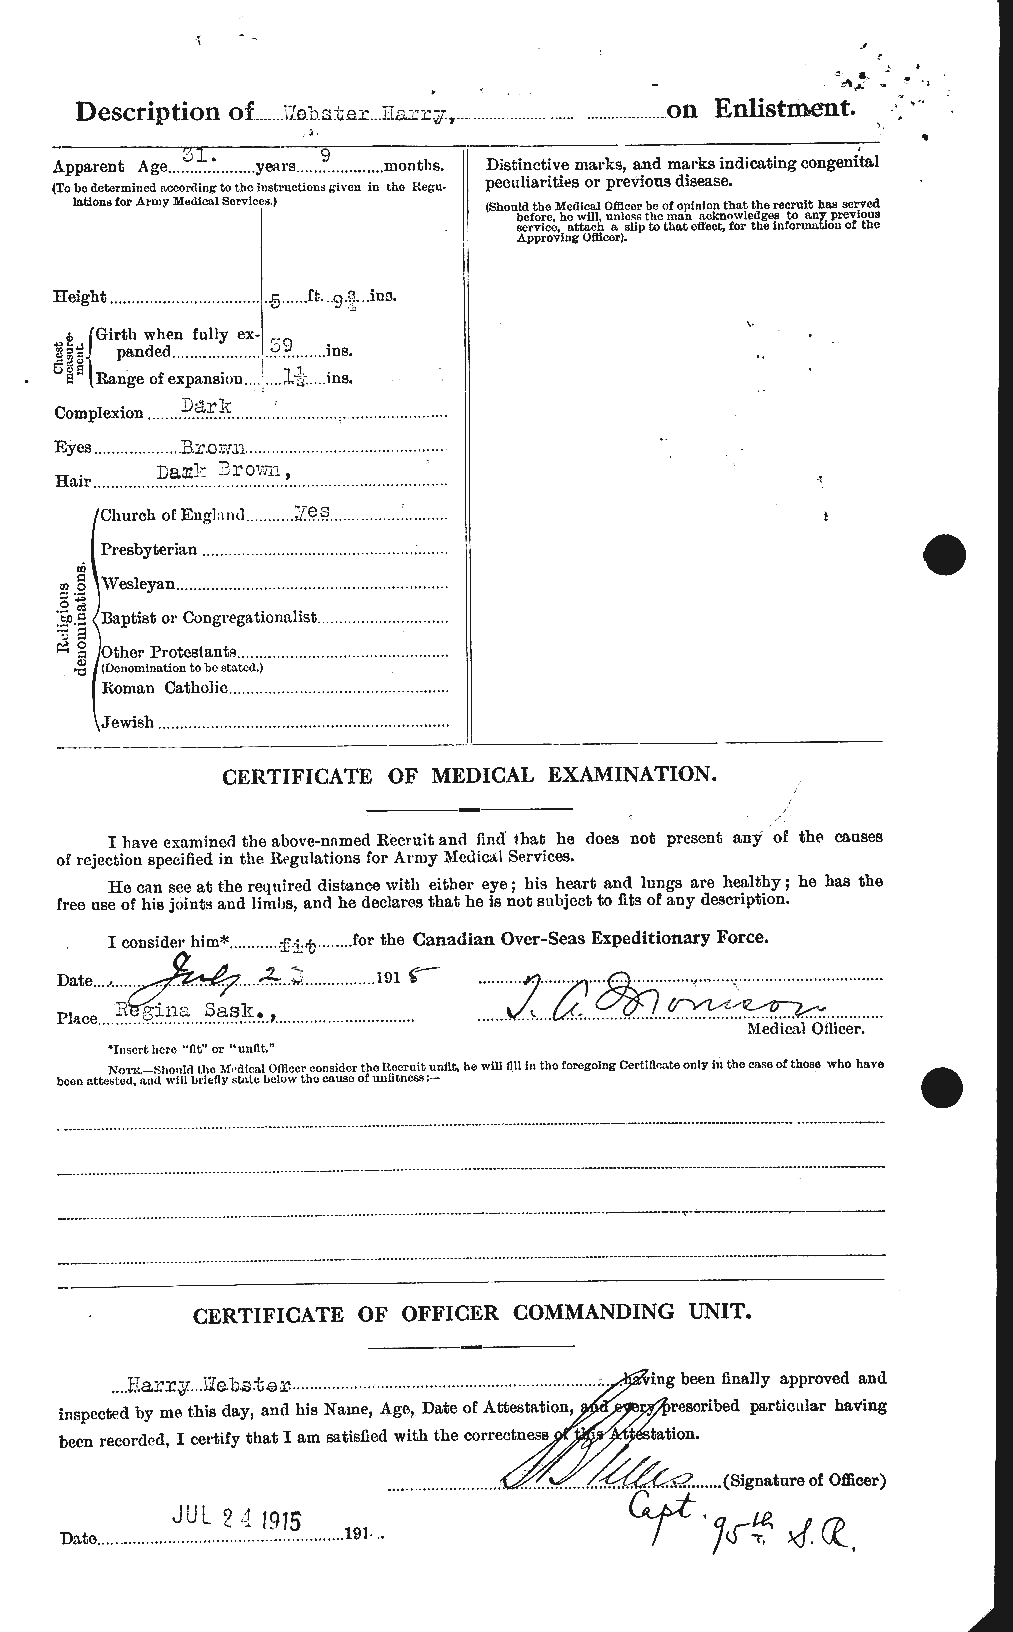 Personnel Records of the First World War - CEF 670409b